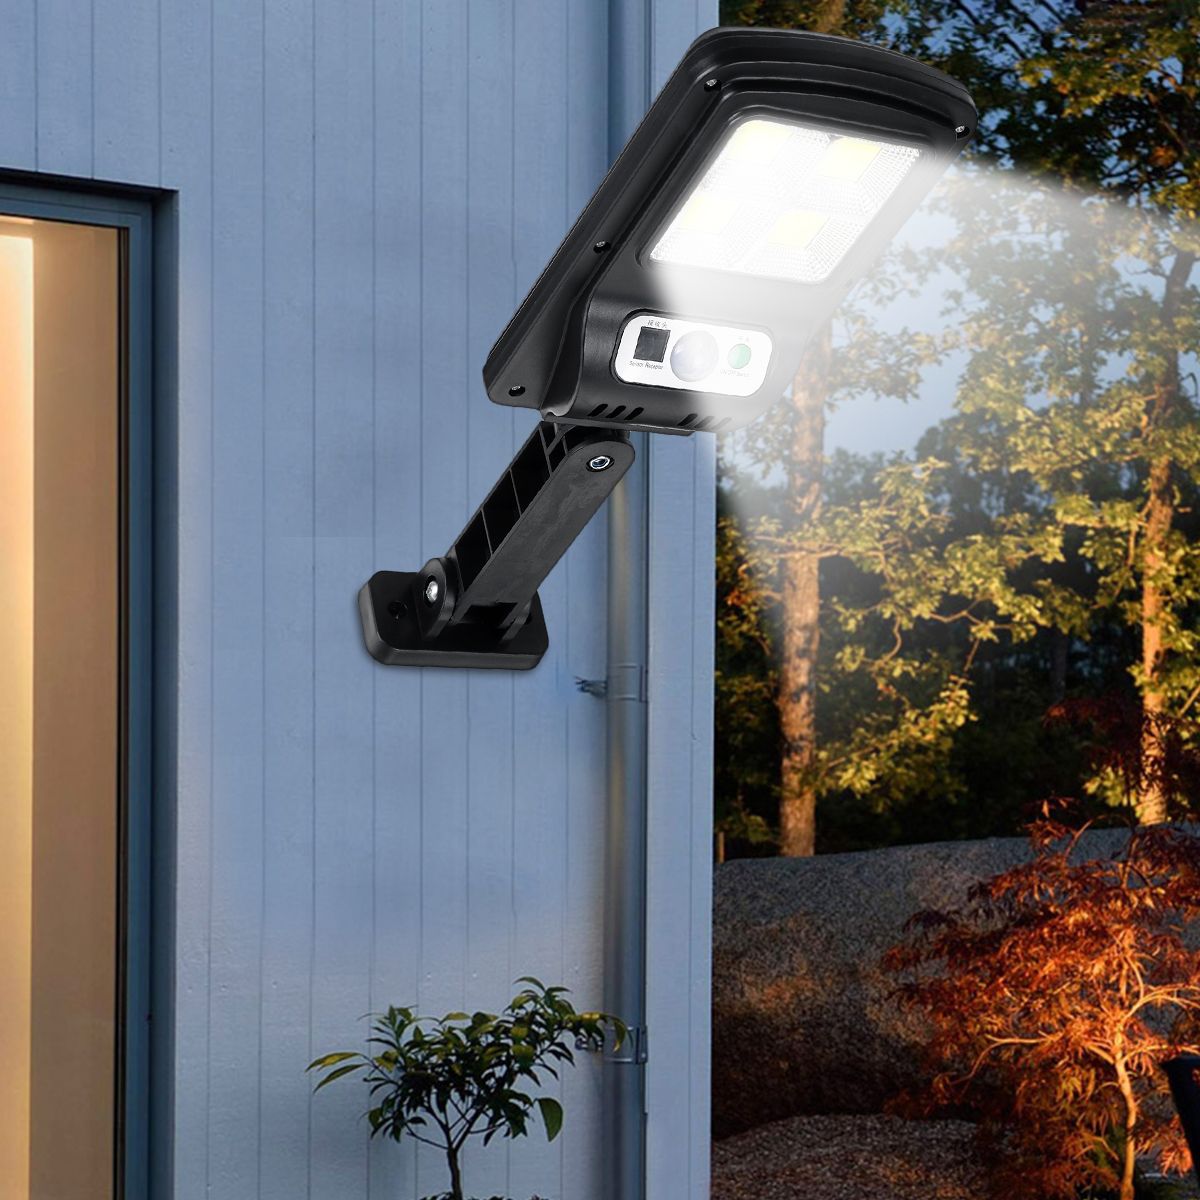 Outdoor-48LED-COB-Solar-Light-Motion-Sensor-IP65-Waterproof-Street-Wall-Lamp-WithWithout-Remote-Cont-1729459